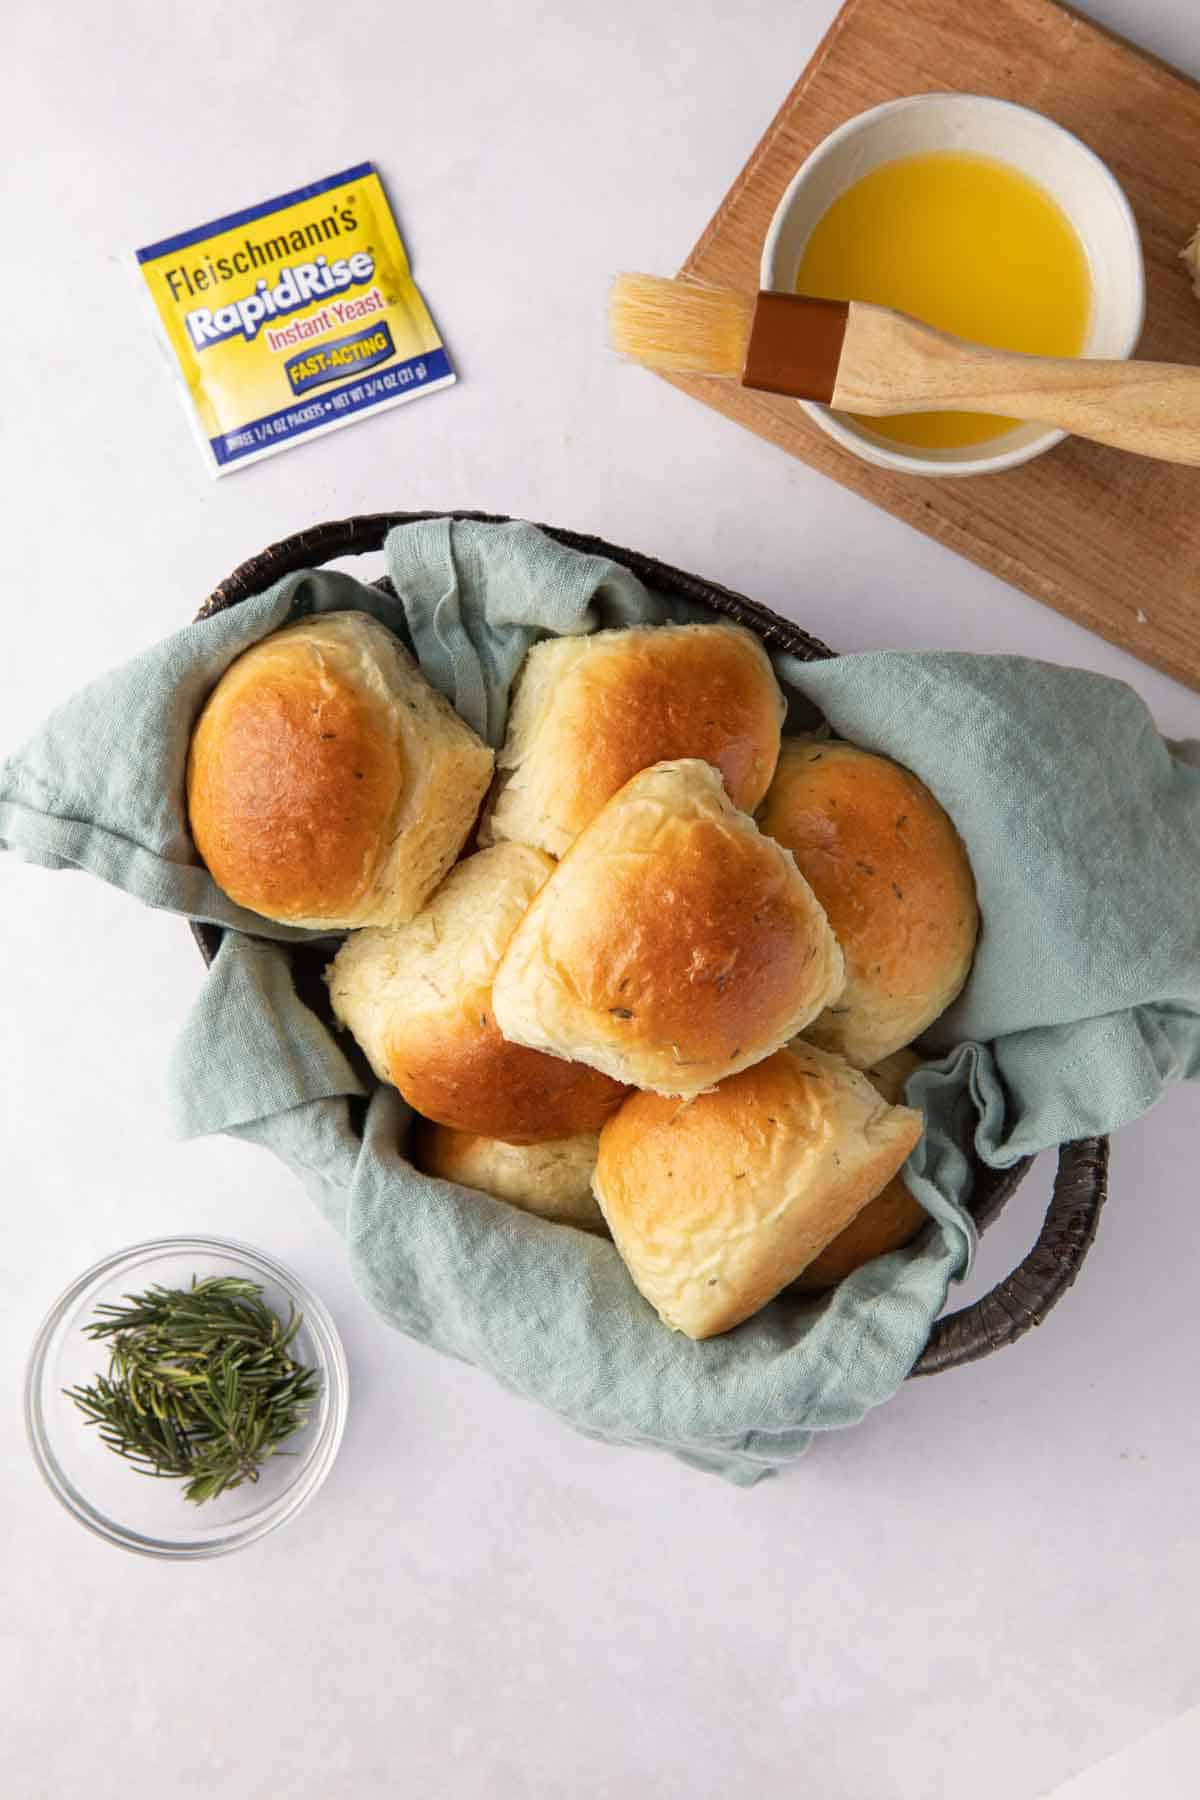 Linen lined oval basket filled with skillet rolls with a hand picking one up, a side dish of fresh rosemary sprigs, a package of Fleischmann's Rapid Rise Instant Yeast, and a small dish of melted butter with a brush resting on top.